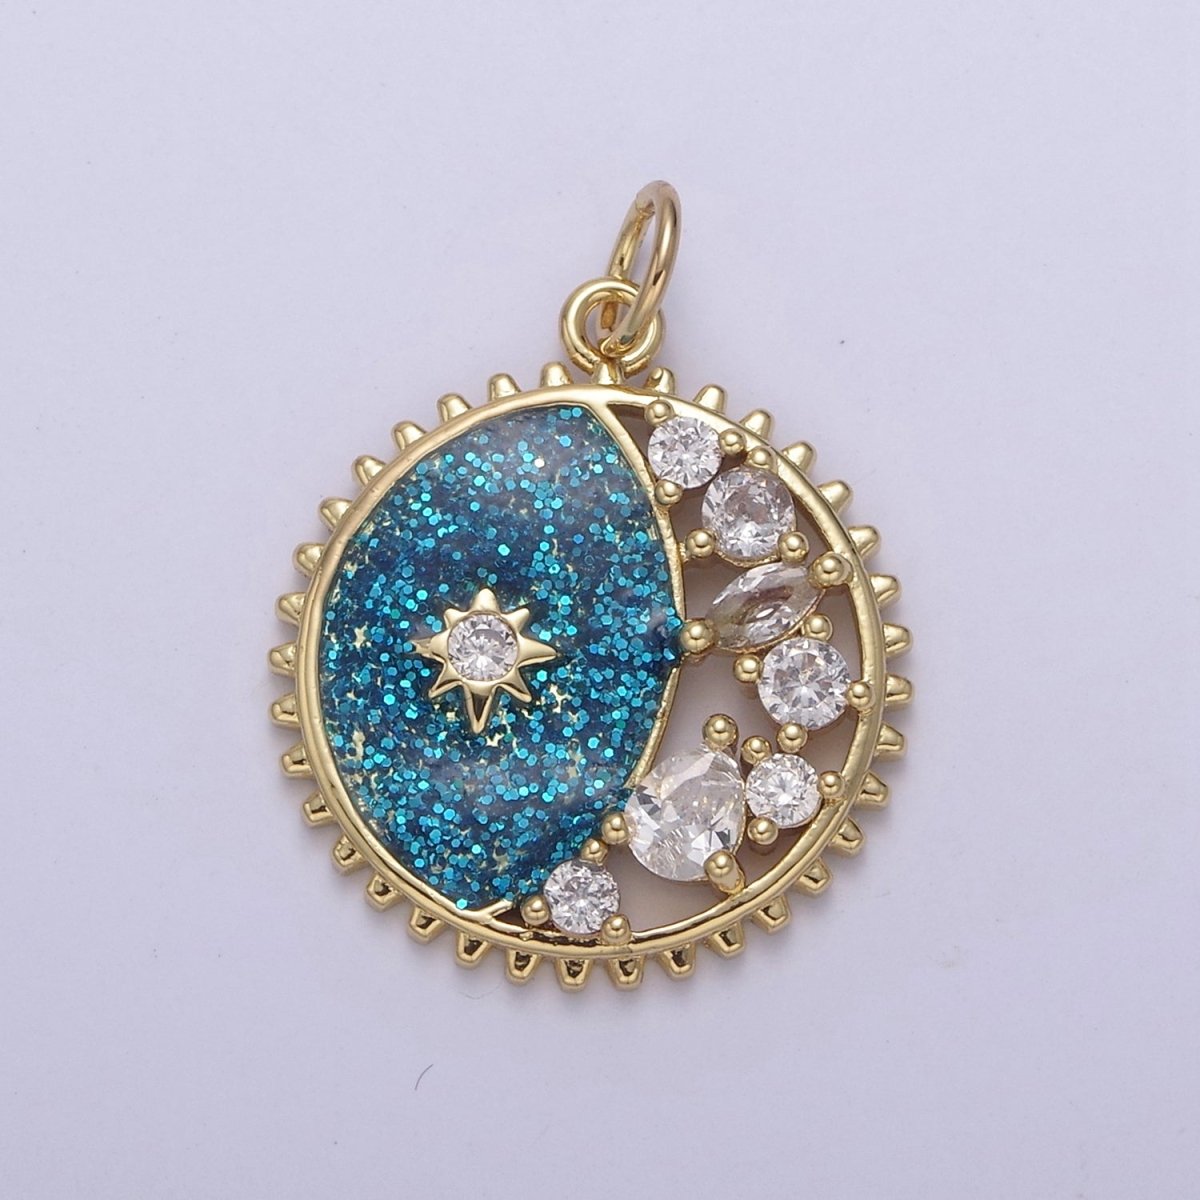 Starburst Star Glitter Sparkle Coin Charm, 17mm coin Gold Filled CZ Coin, Celestial CZ Drop Pendant N-726 - N-728 - DLUXCA